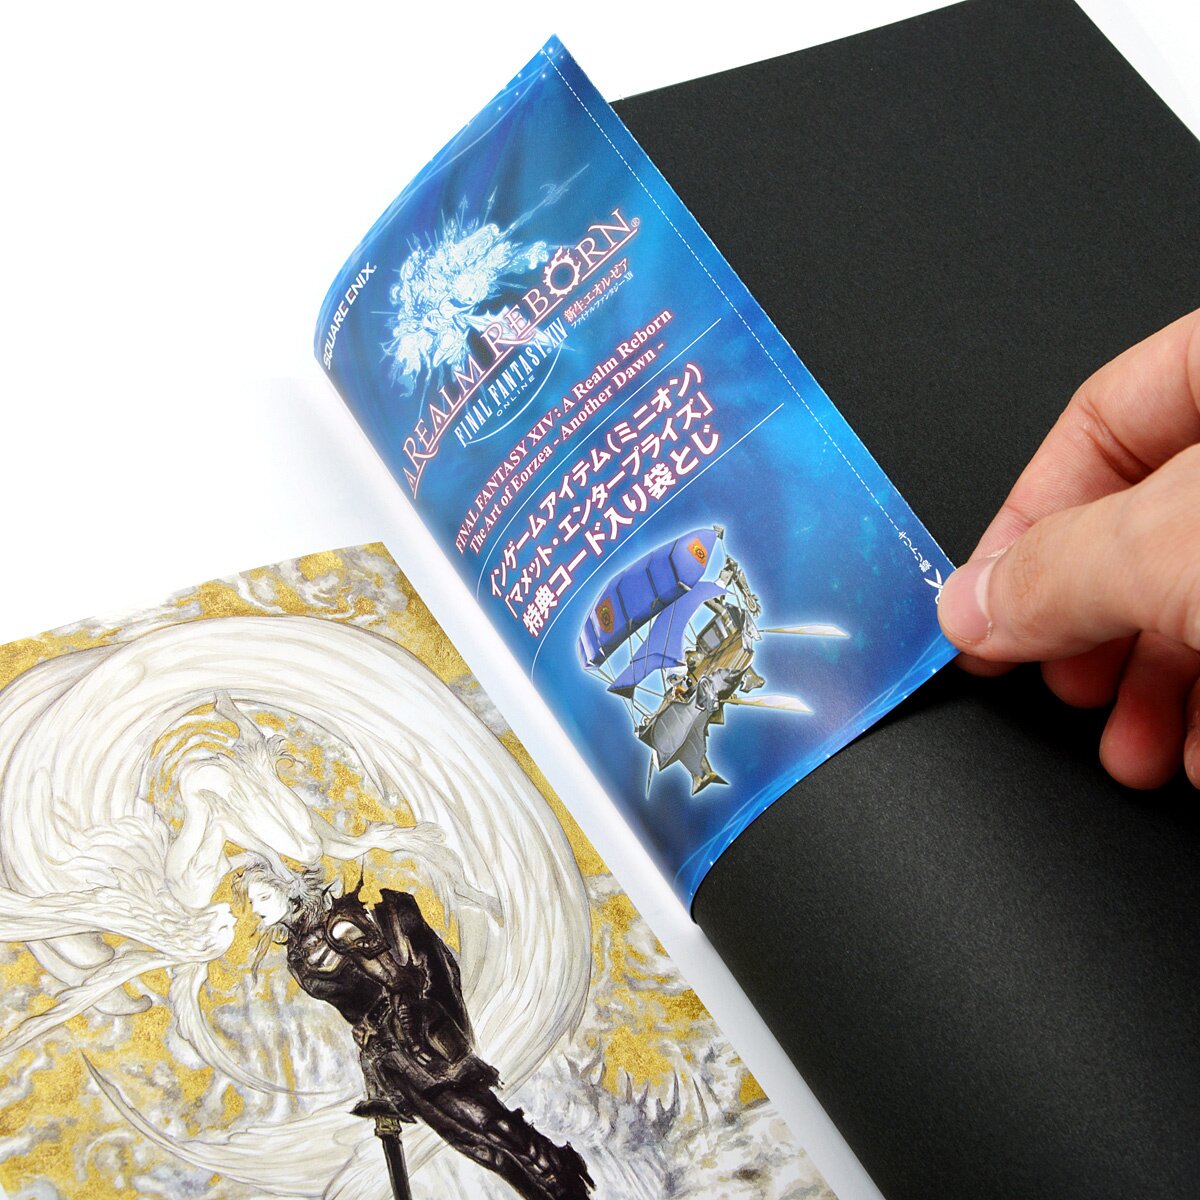 Final Fantasy XIV A Realm Reborn The Art of Eorzea Another Dawn Artbook